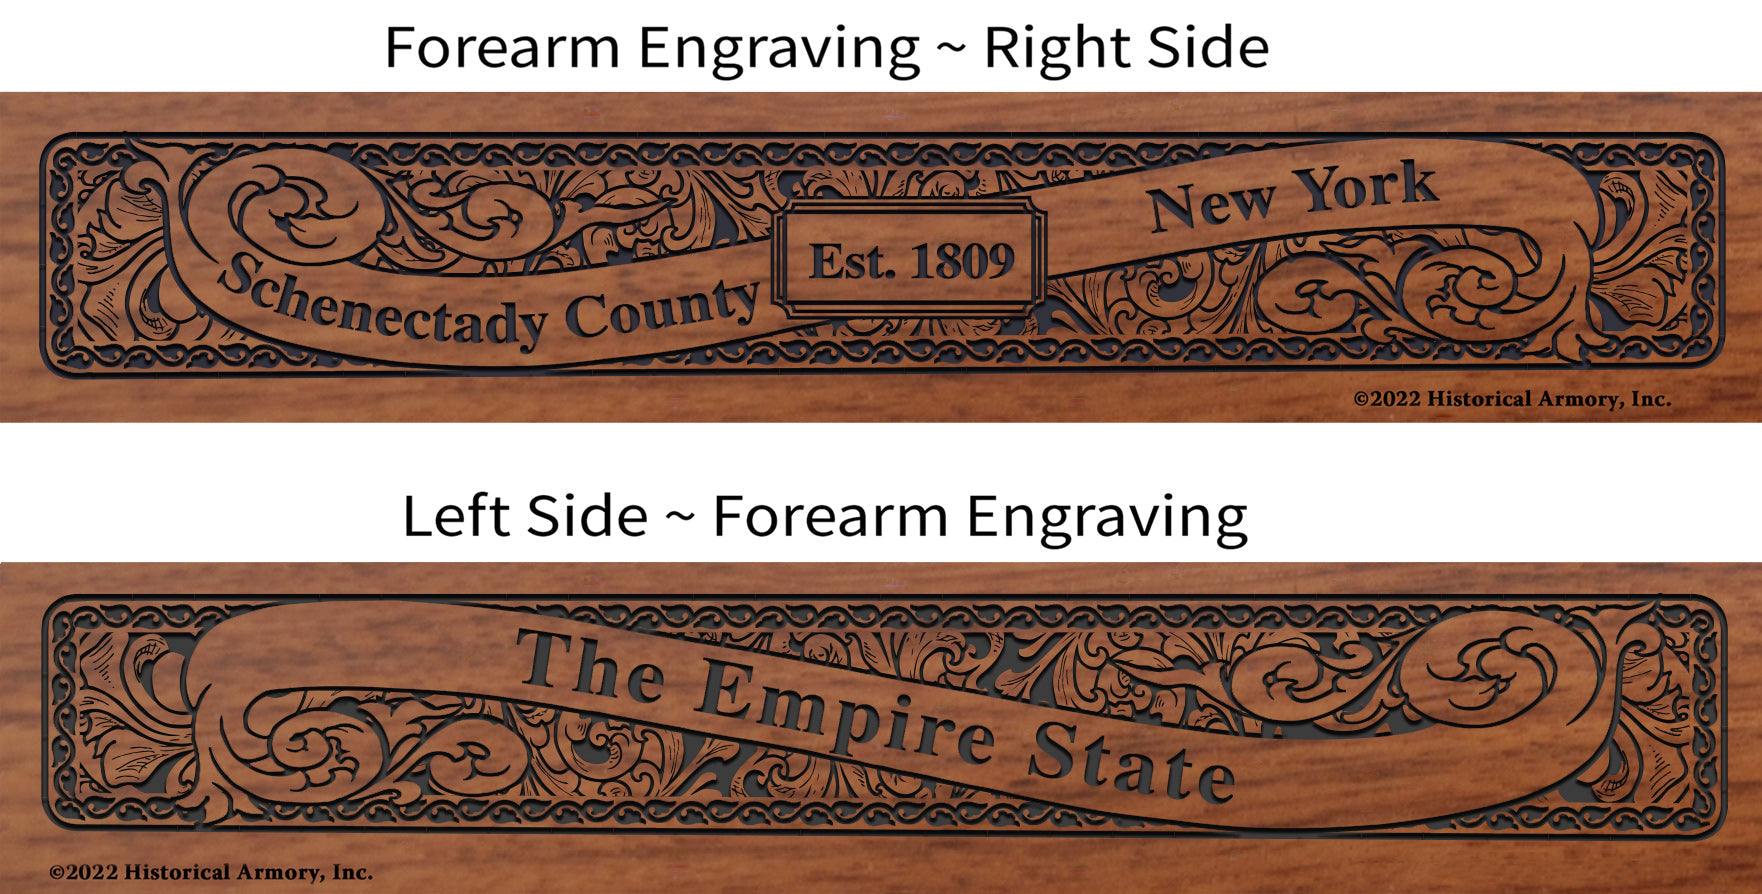 Schenectady County New York Engraved Rifle Forearm